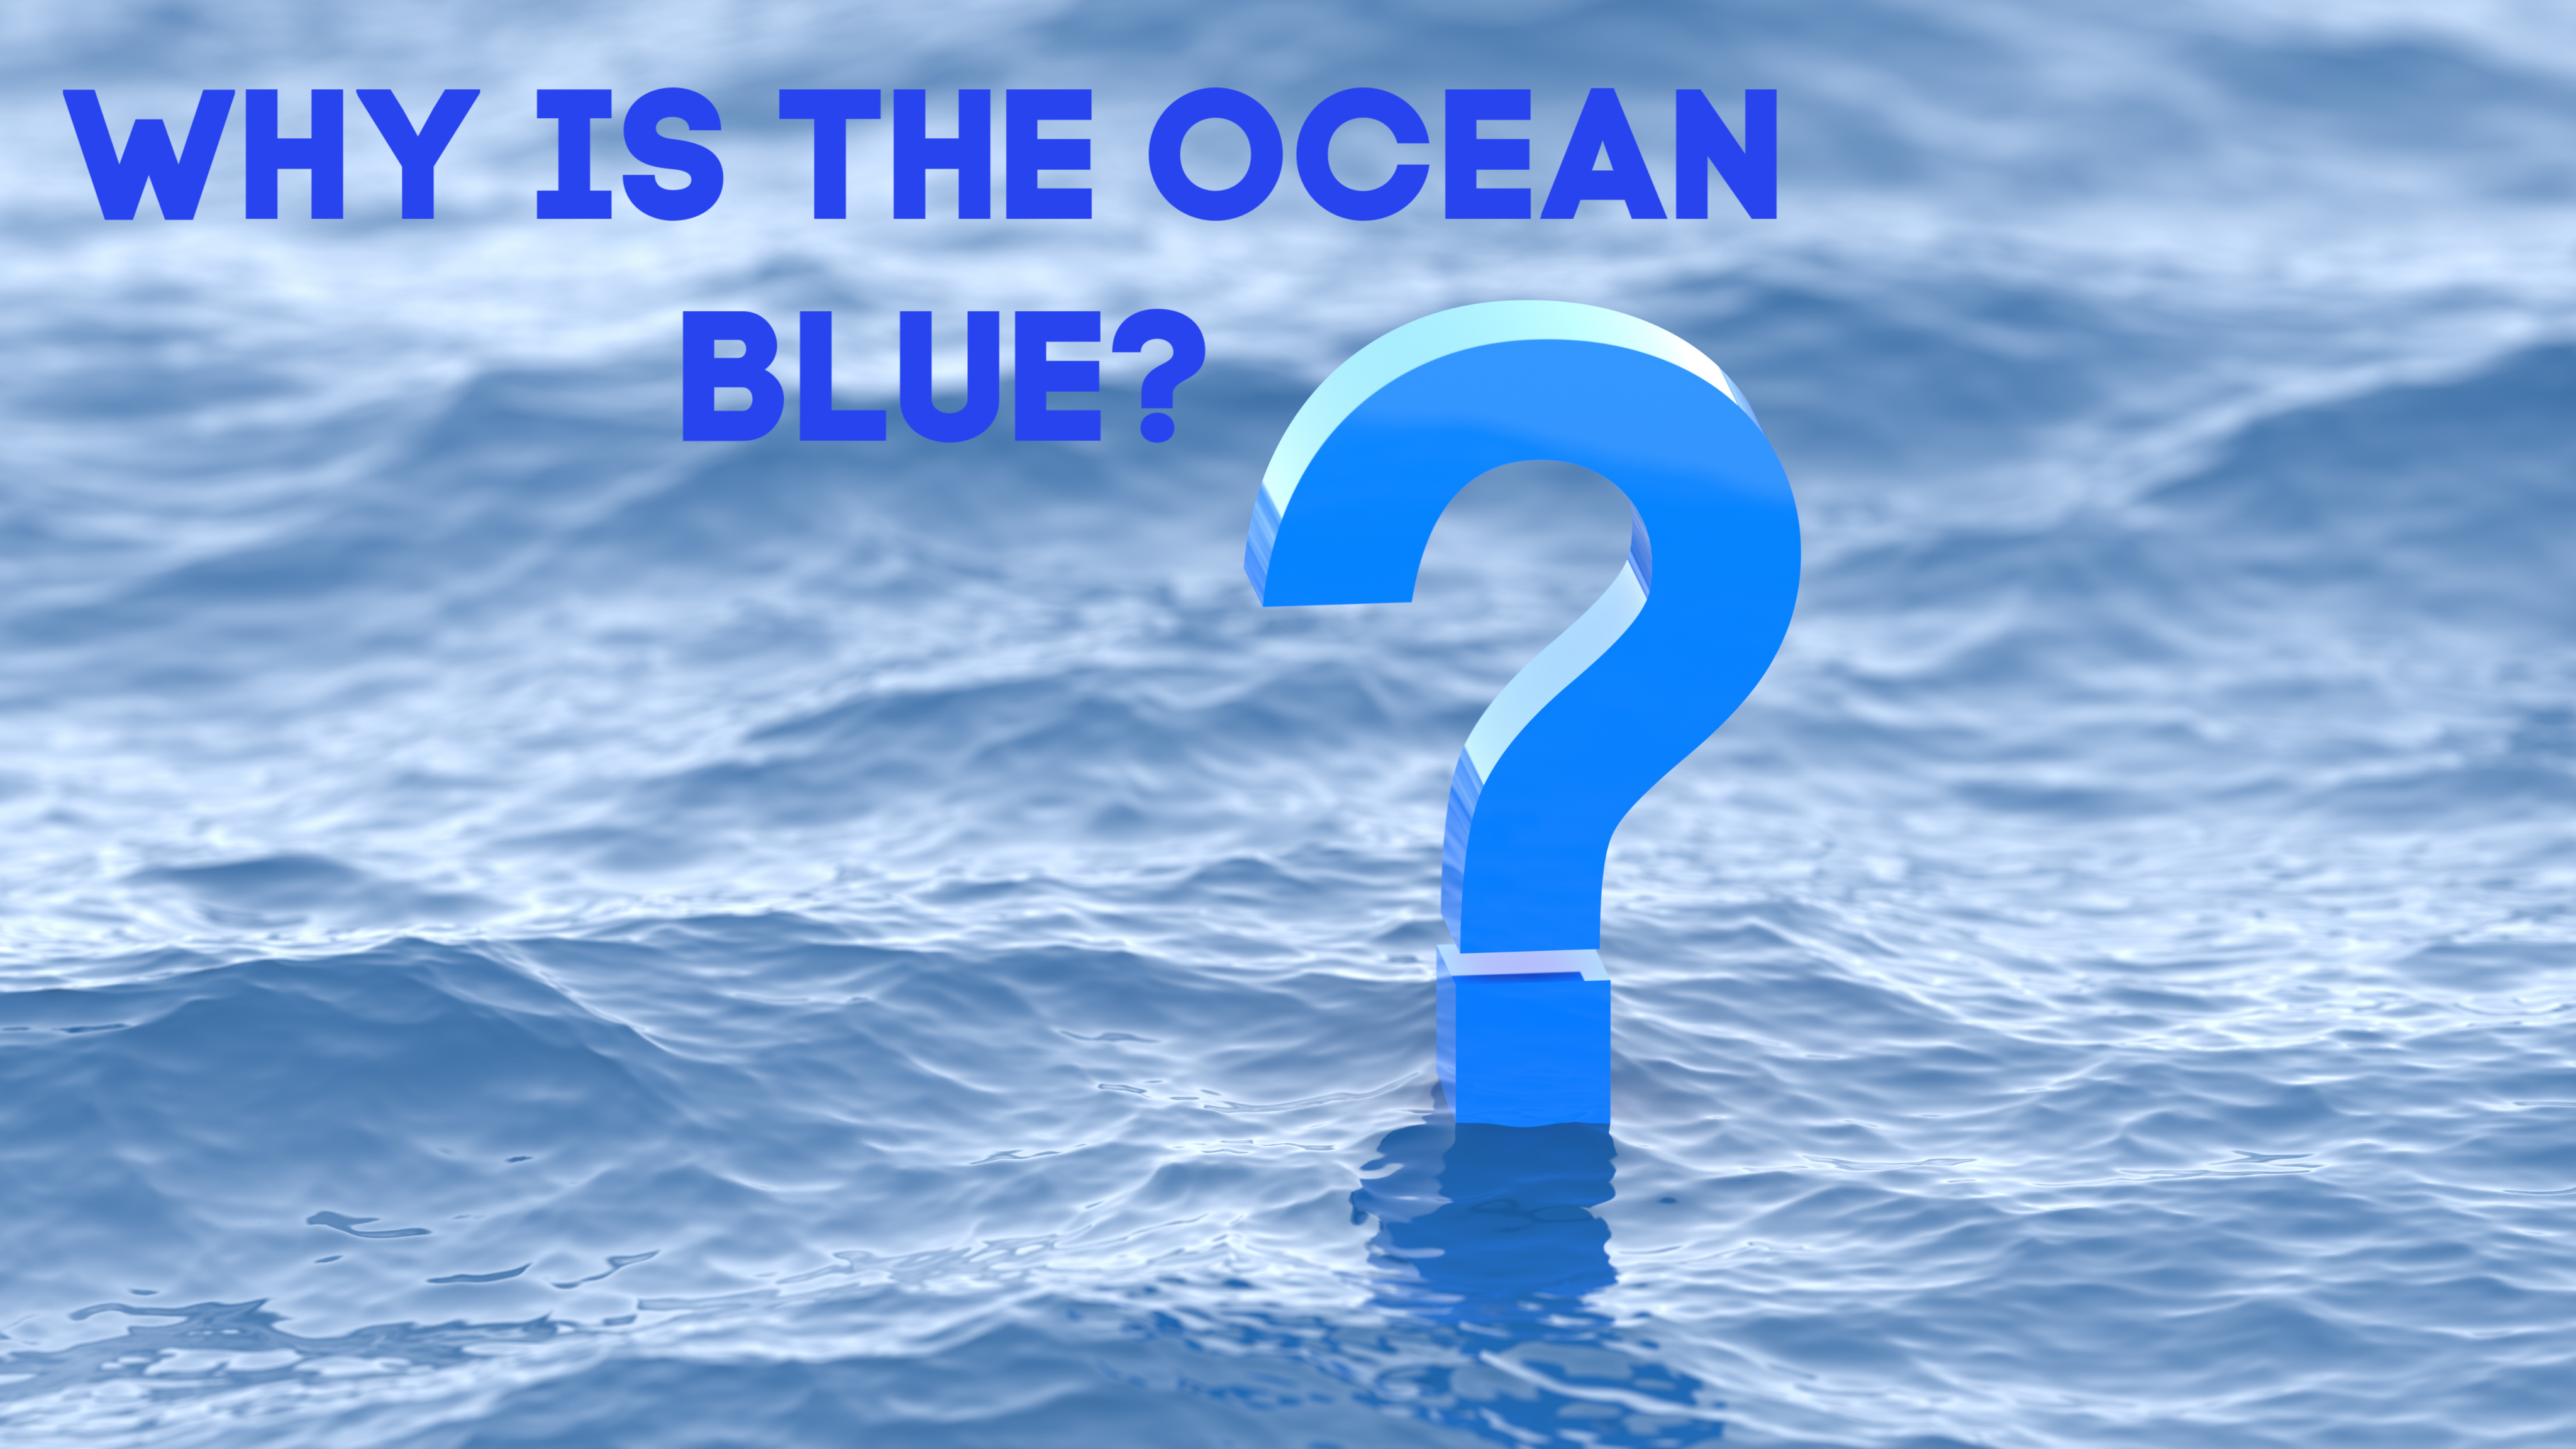 Why is the ocean blue - Science Questions